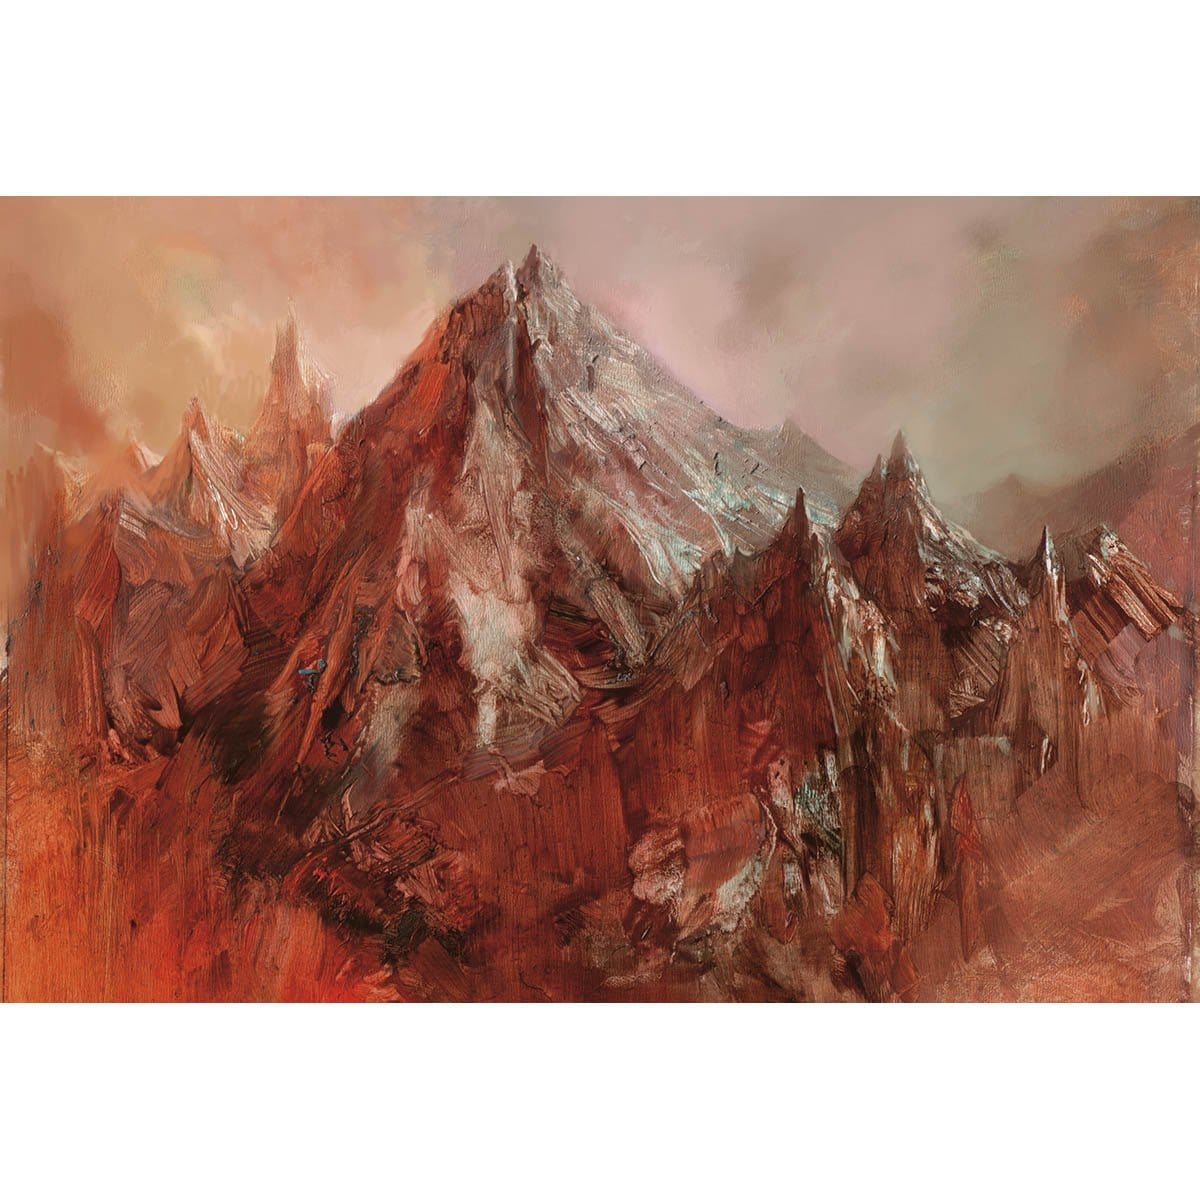 Mountain (Magic 2010) Print - Print - Original Magic Art - Accessories for Magic the Gathering and other card games